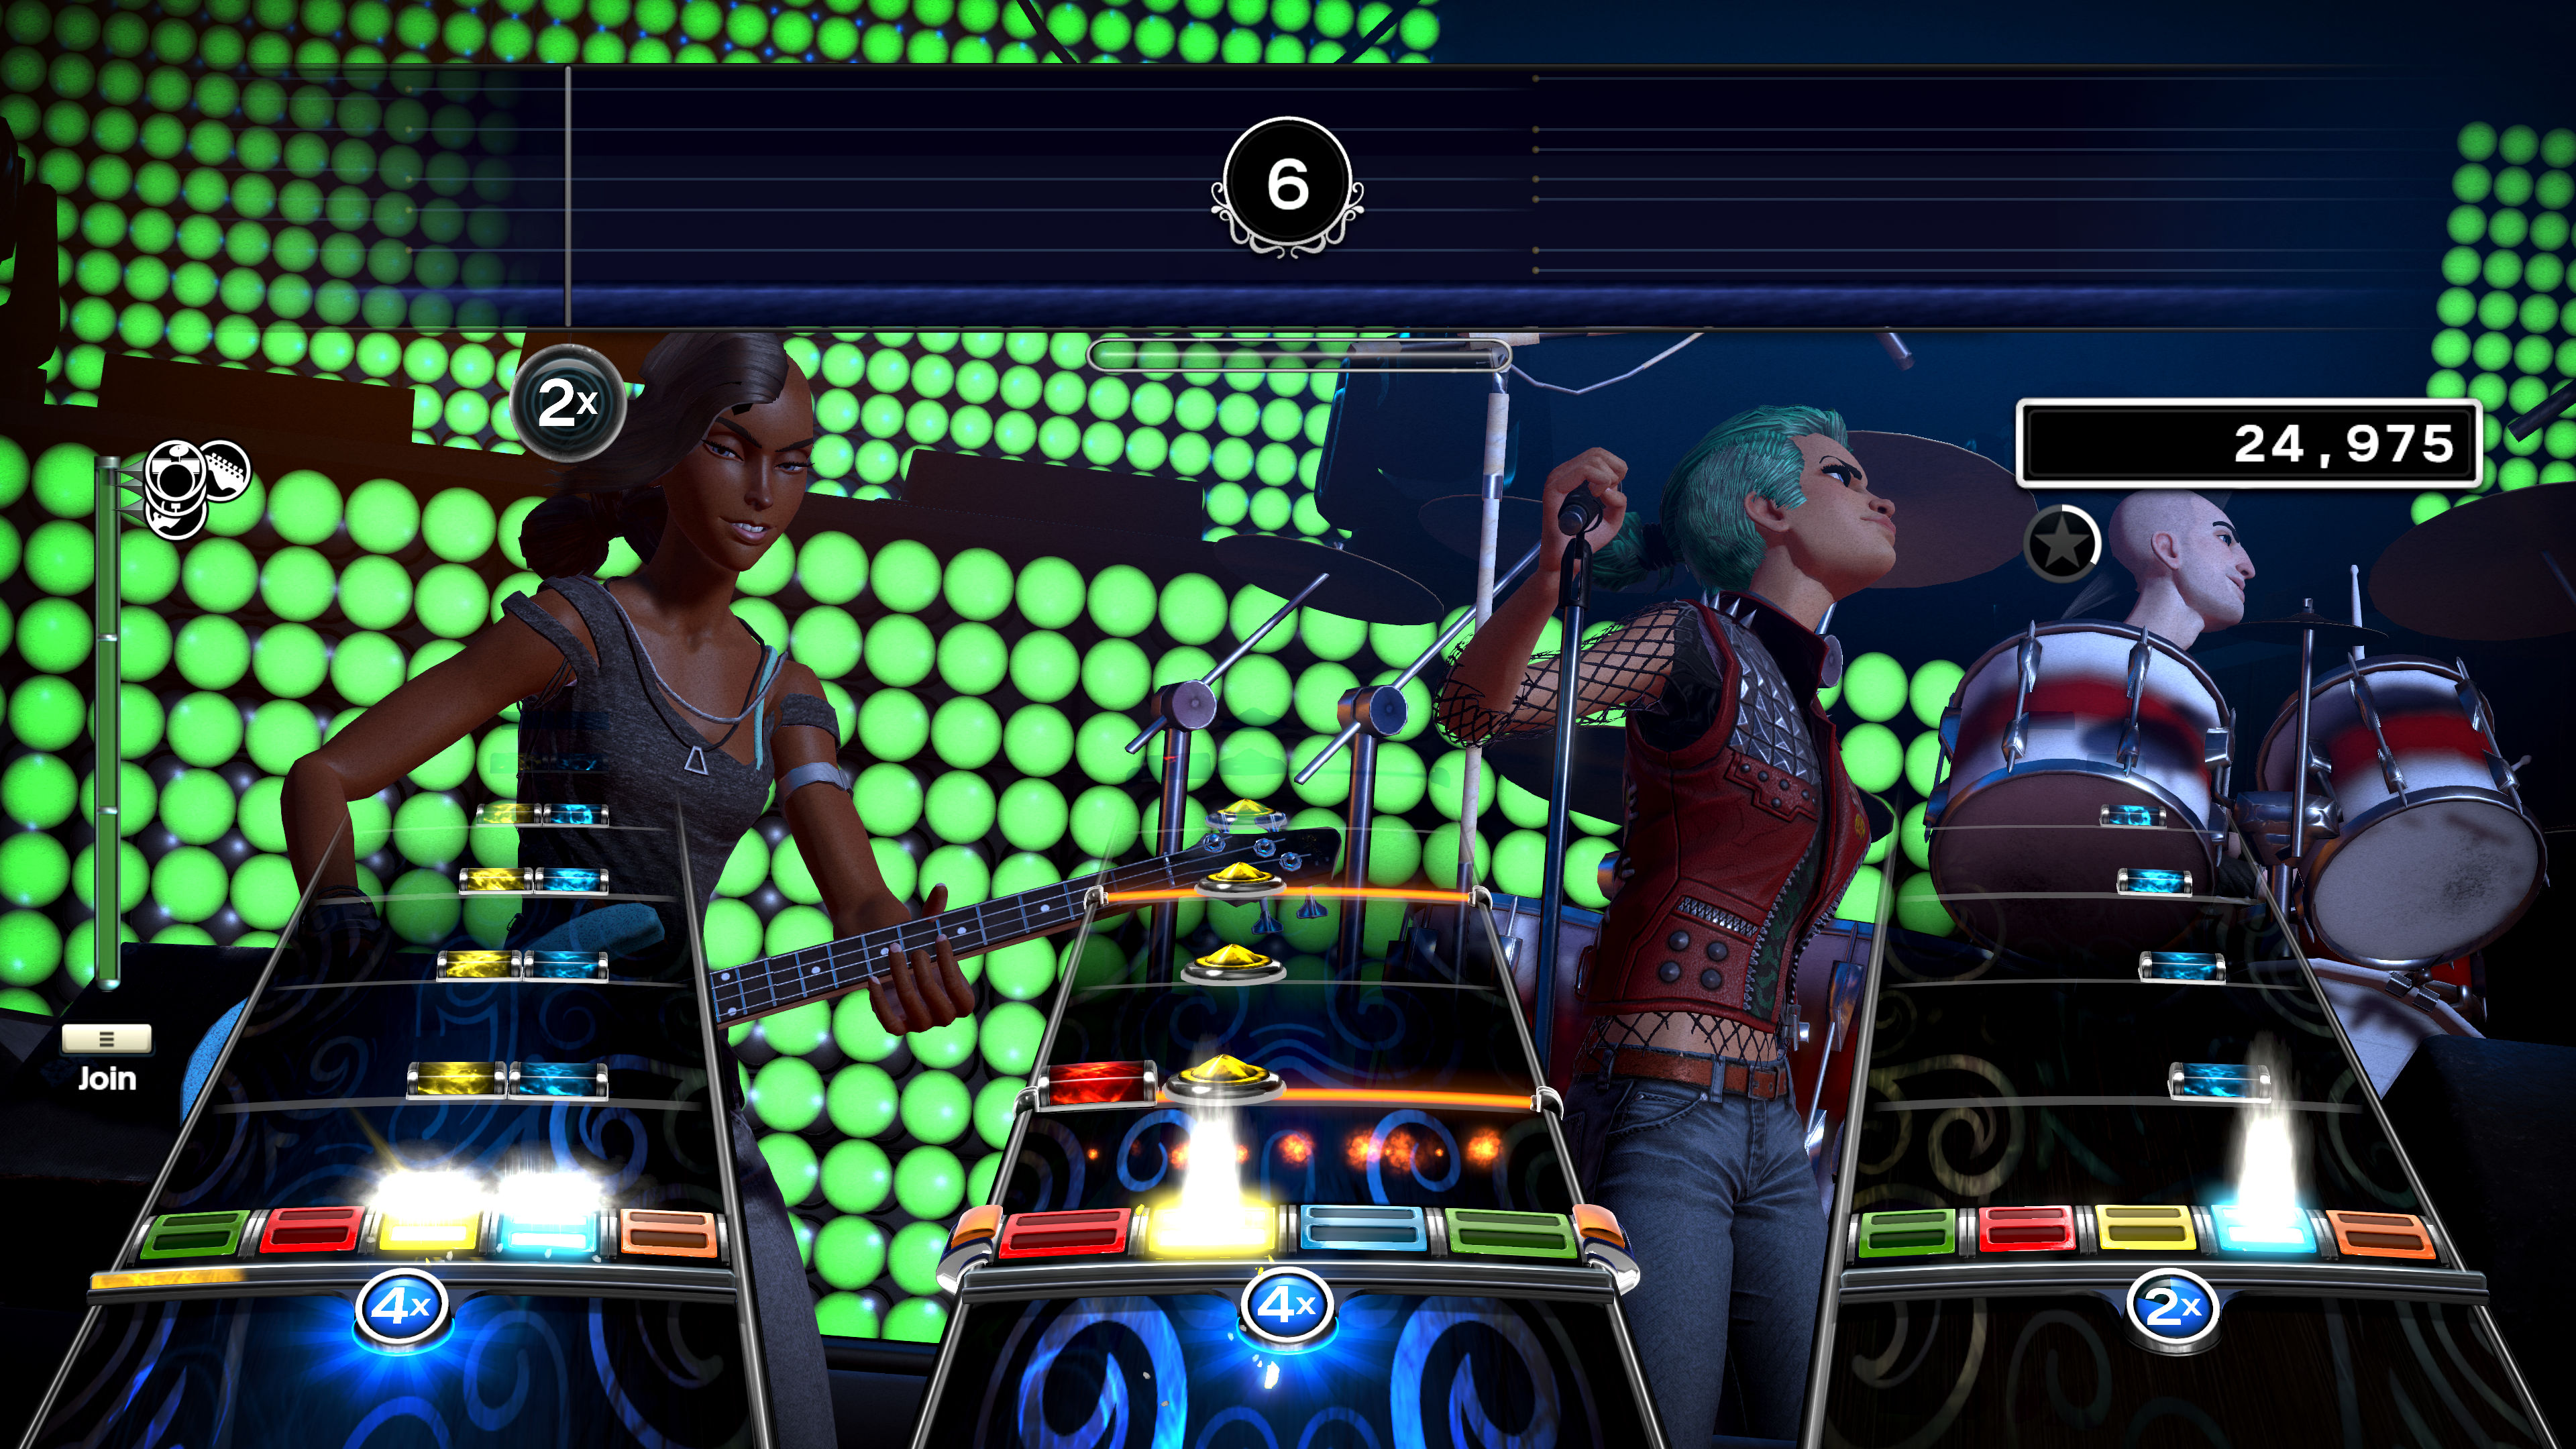 Review Rock Band 4 Makes An Old Favorite Come Alive With Refreshed